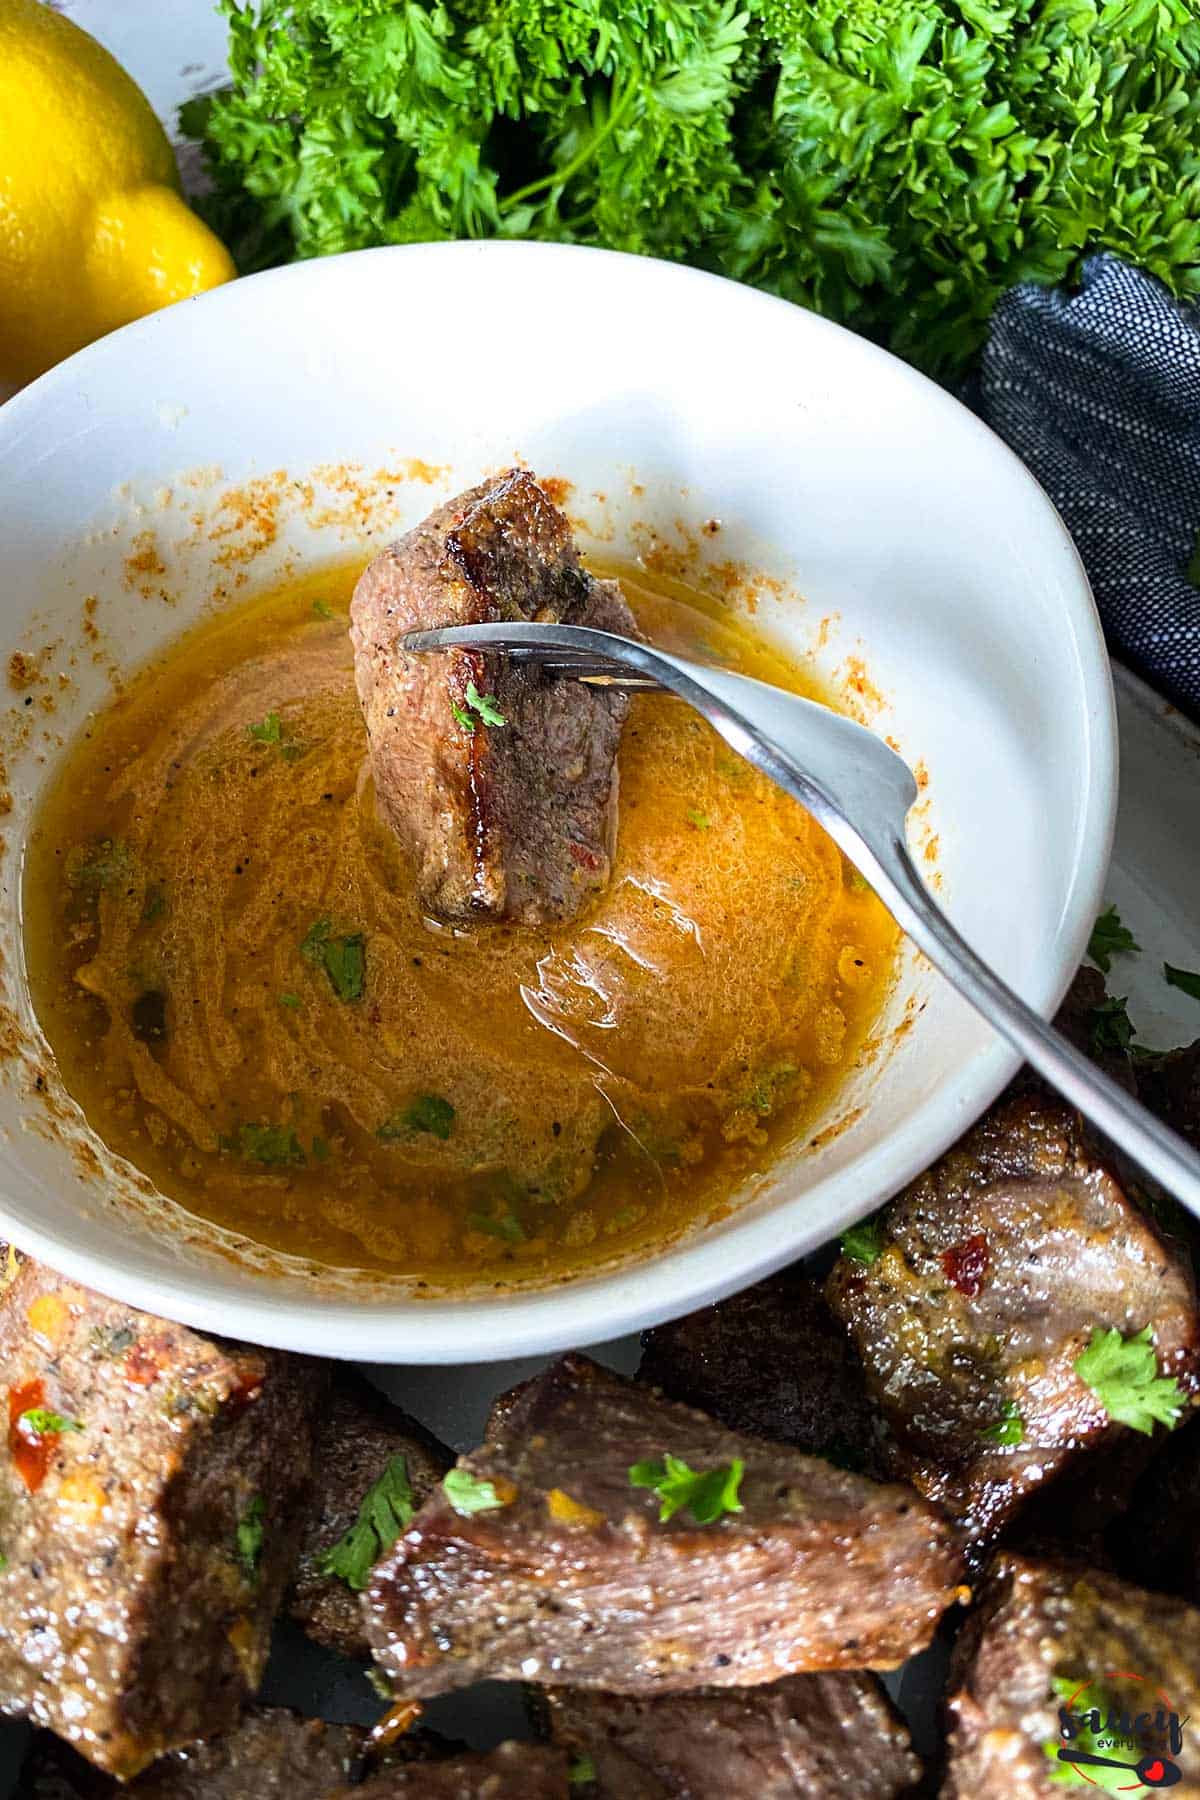 Dipping a steak bite into cowboy butter sauce in a bowl